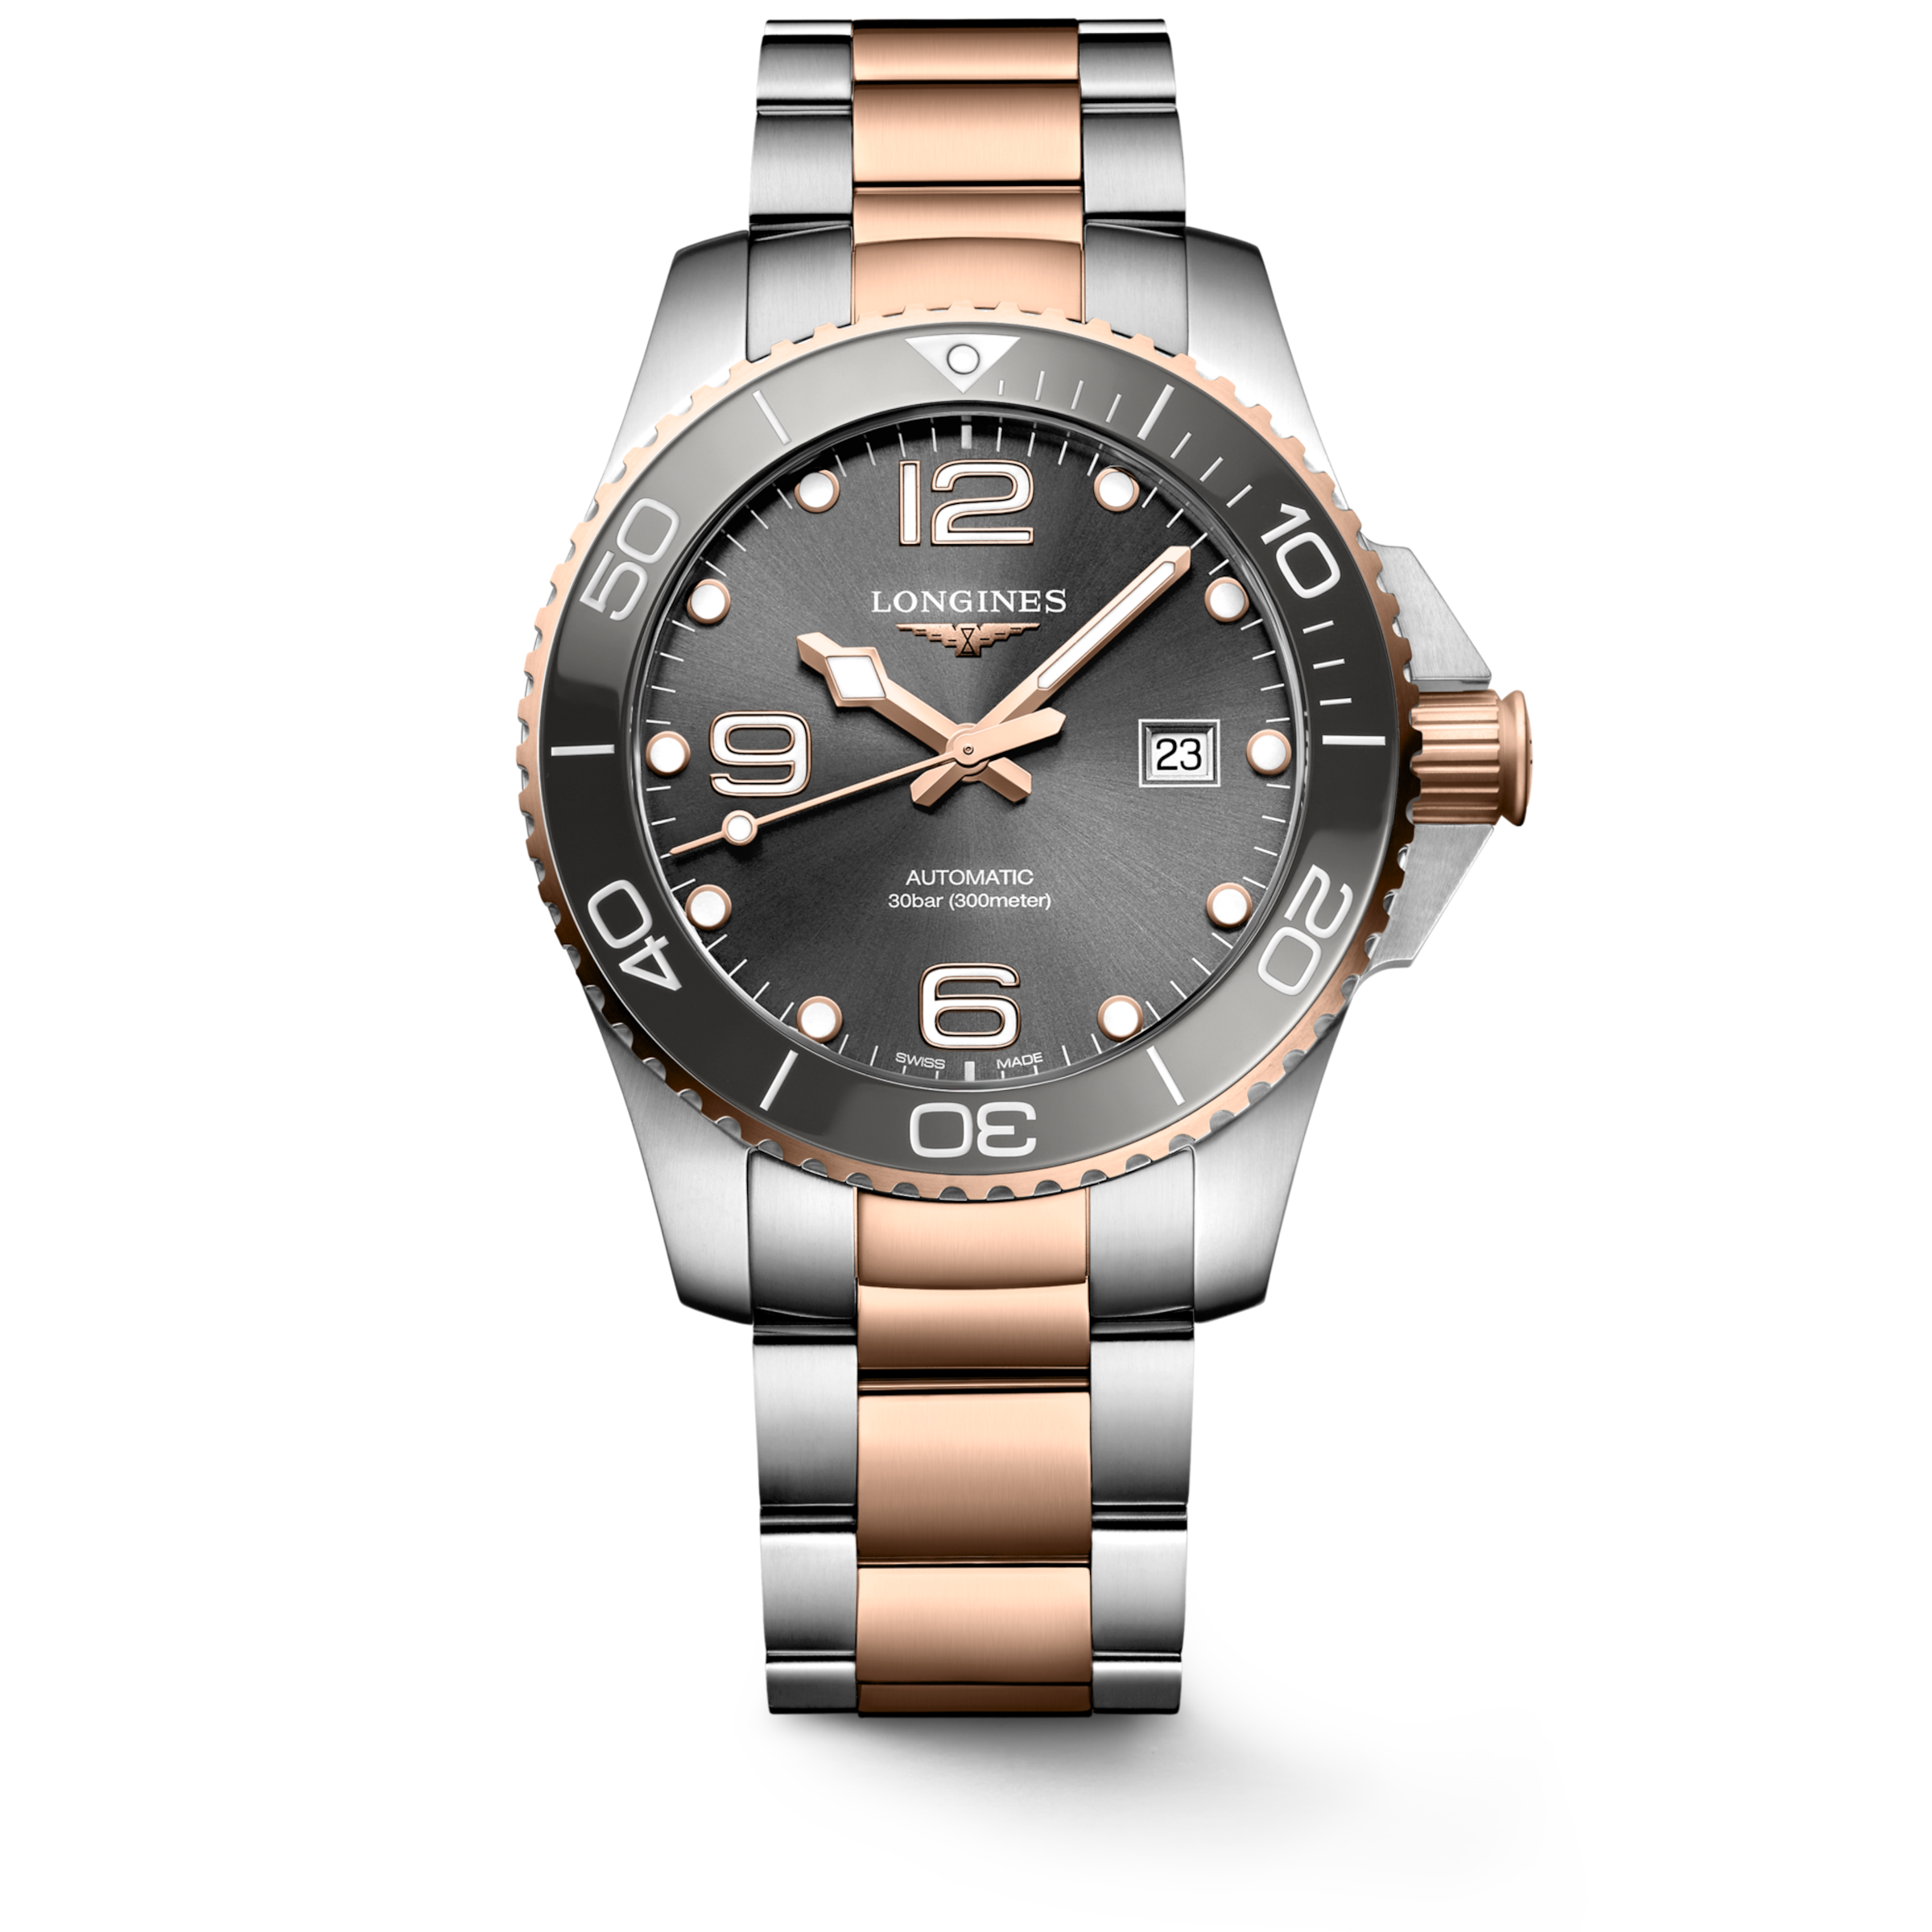 Longines HYDROCONQUEST Automatic Stainless steel and ceramic bezel Watch - L3.782.3.78.7